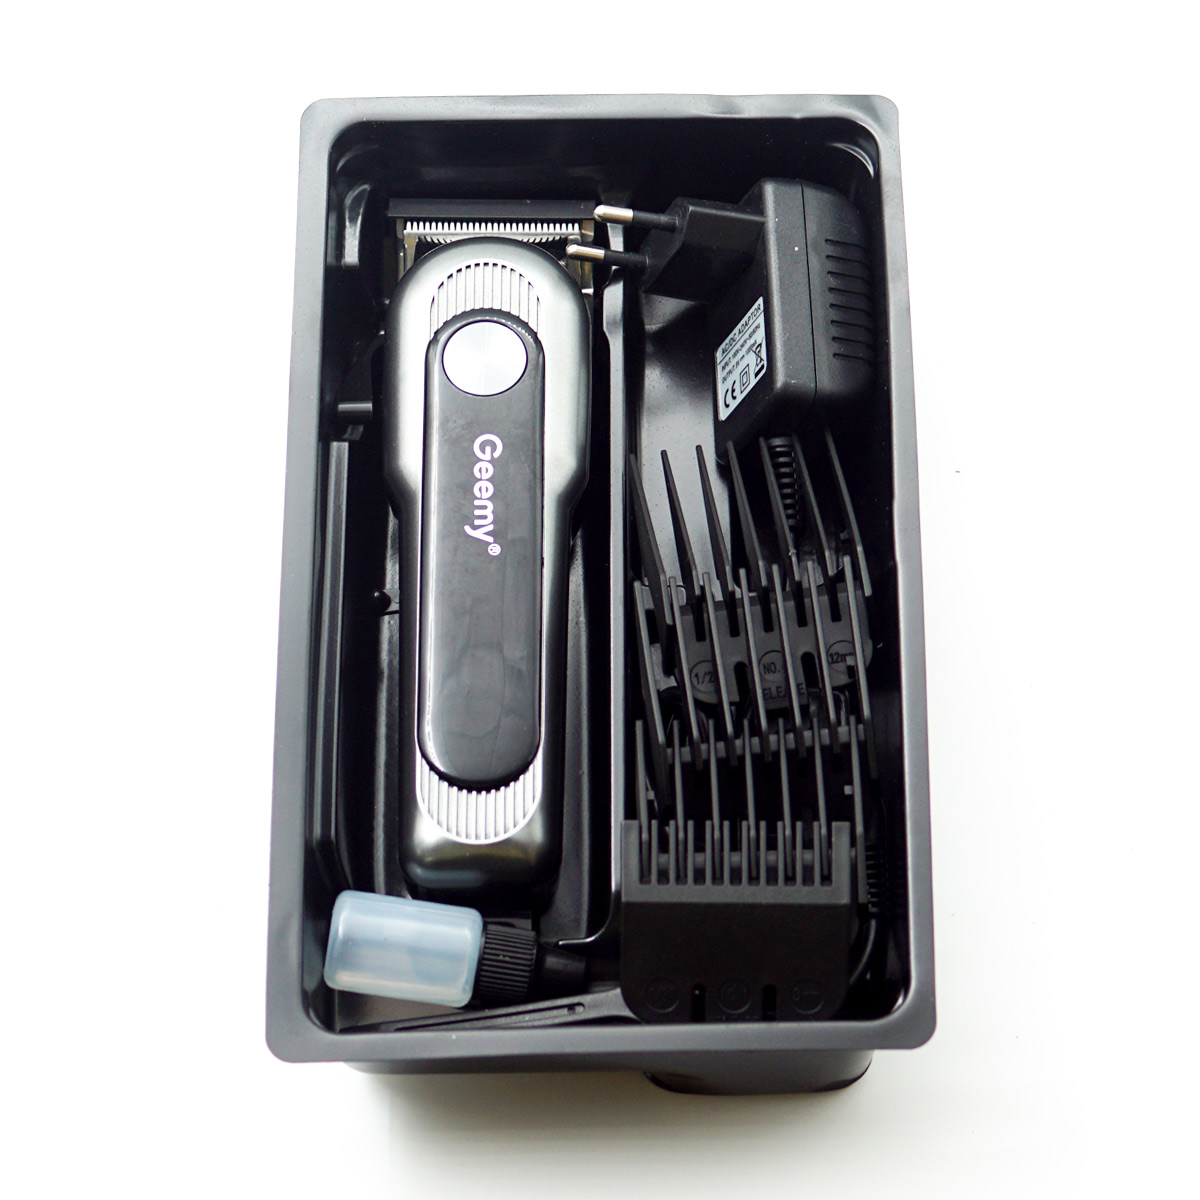 Geemy GM-6080 Trimmer 200 min Runtime 4 Length Settings And Rechargeable Hair Clipper(Black) SKU 96593